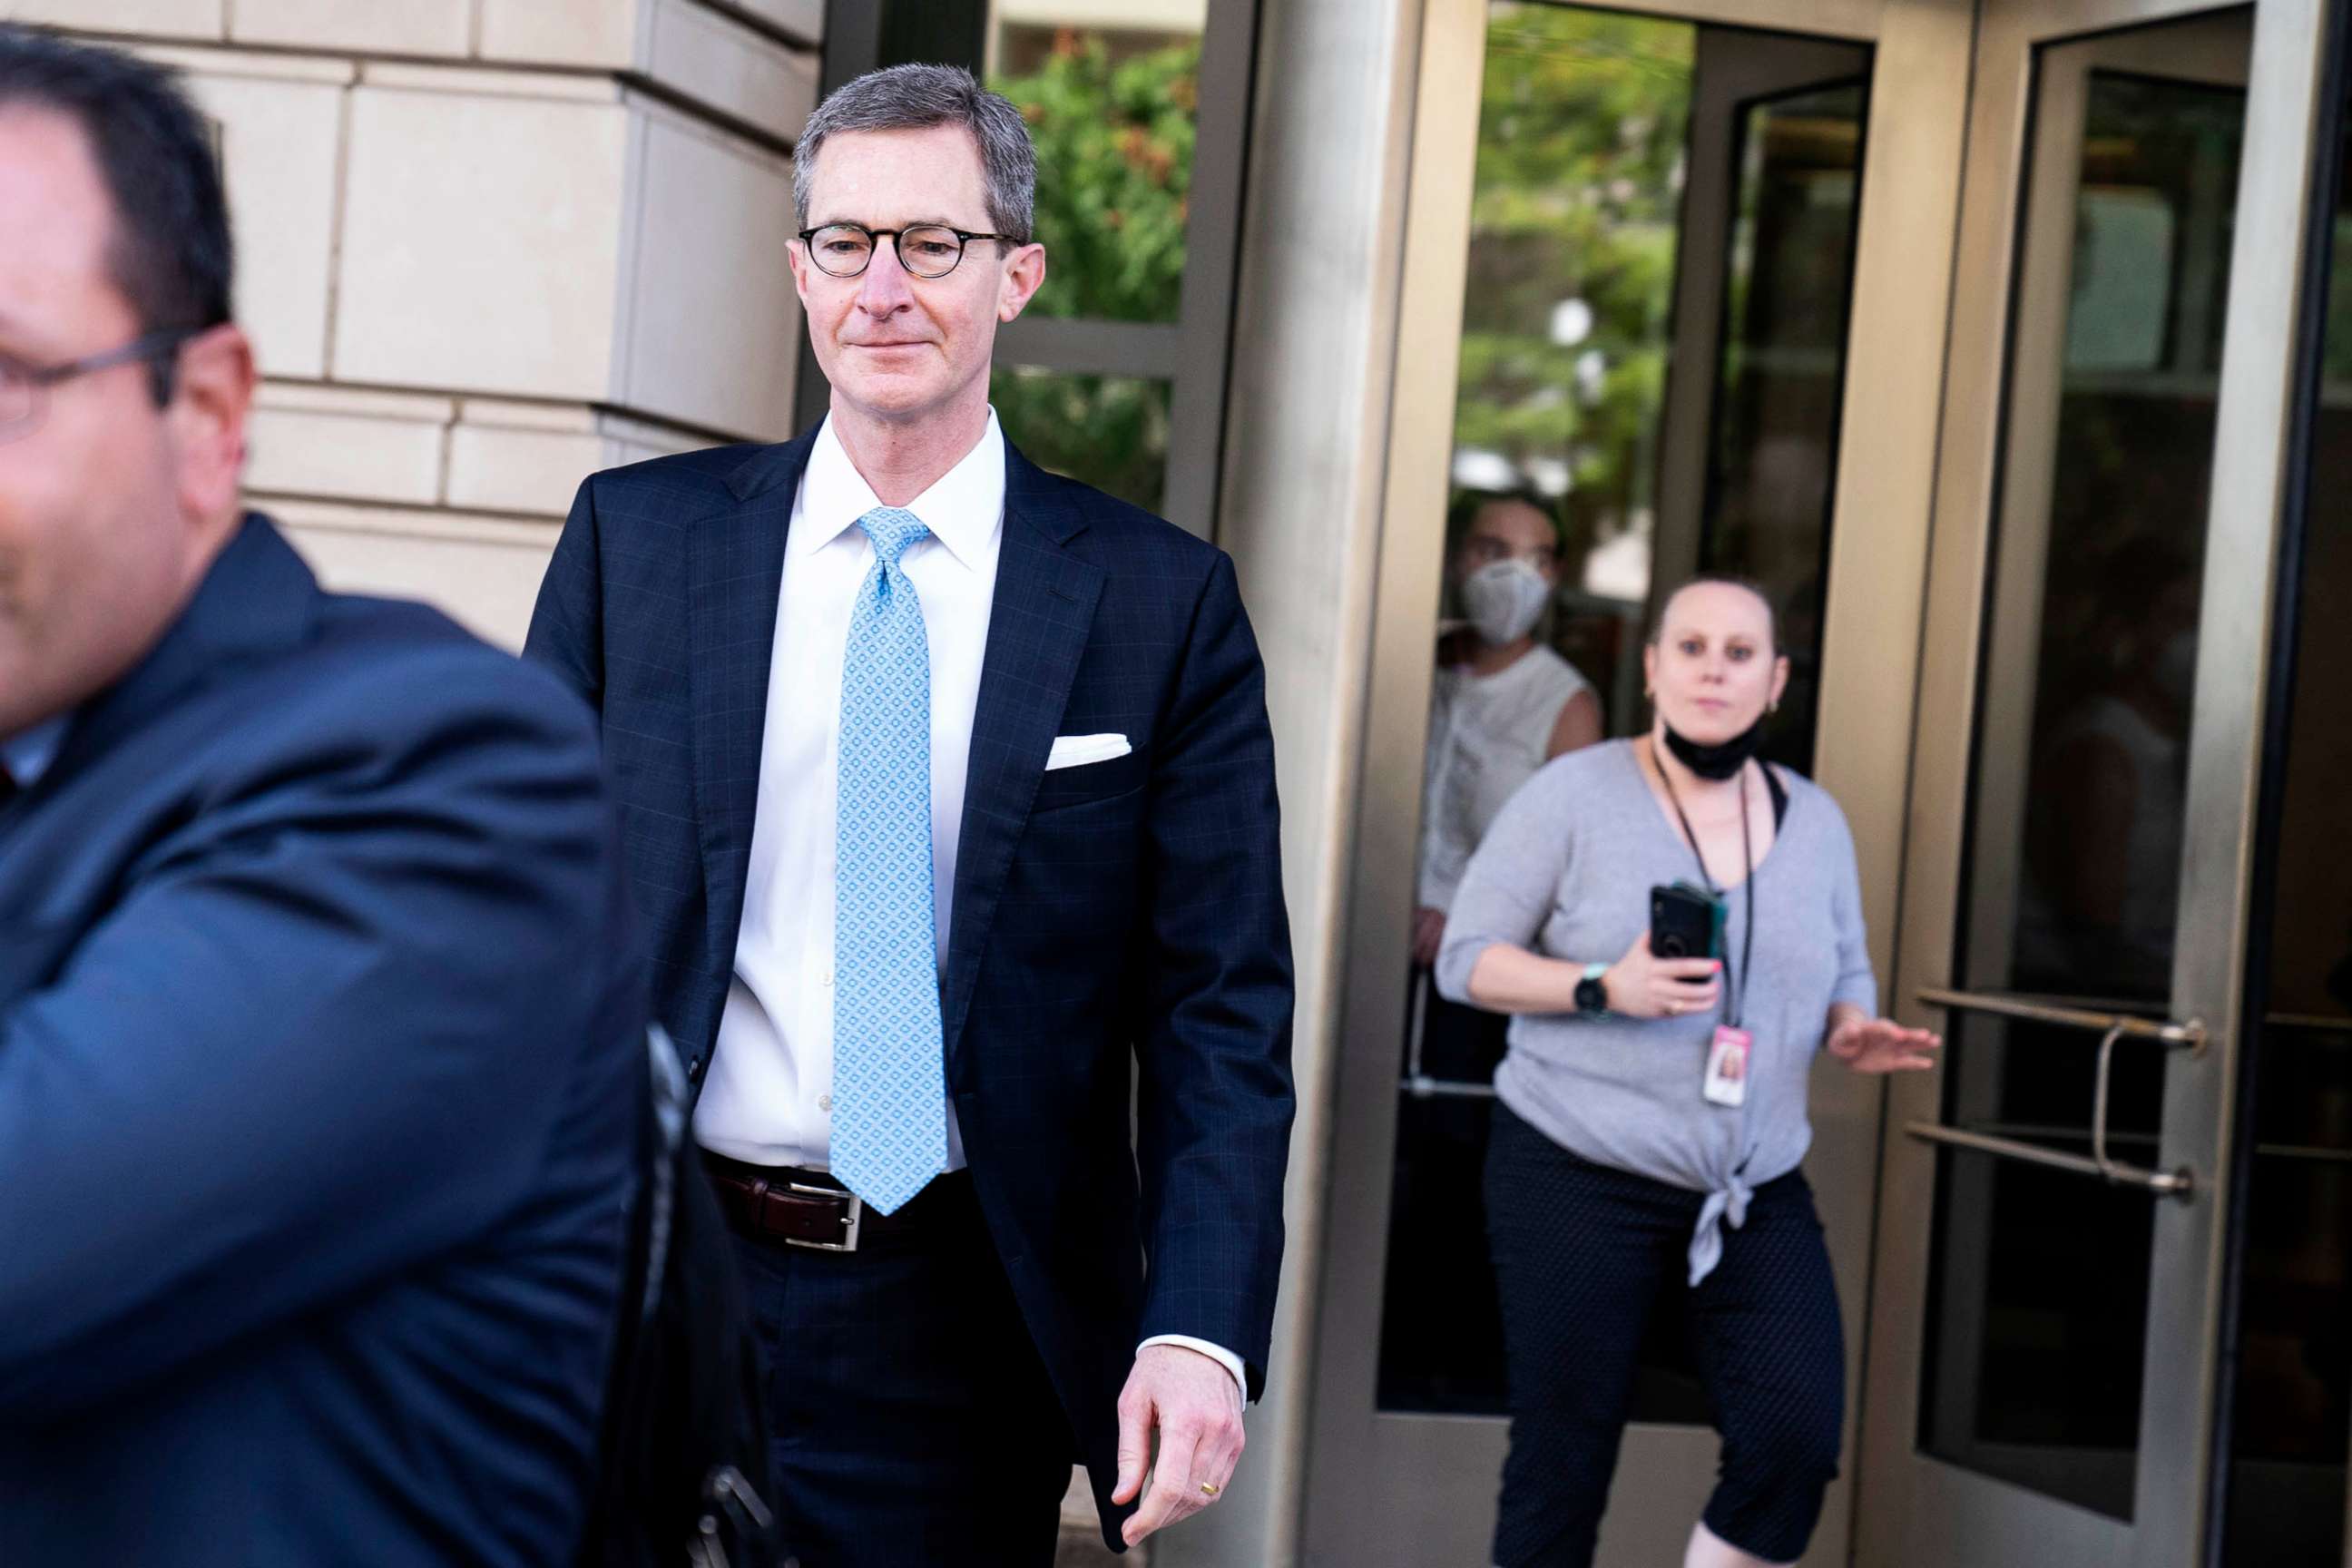 PHOTO: FILE - Former deputy White House counsel Pat Philbin departs from E. Barrett Prettyman United States Courthouse after appearing before a grand jury, Sept. 2, 2022 in Washington.